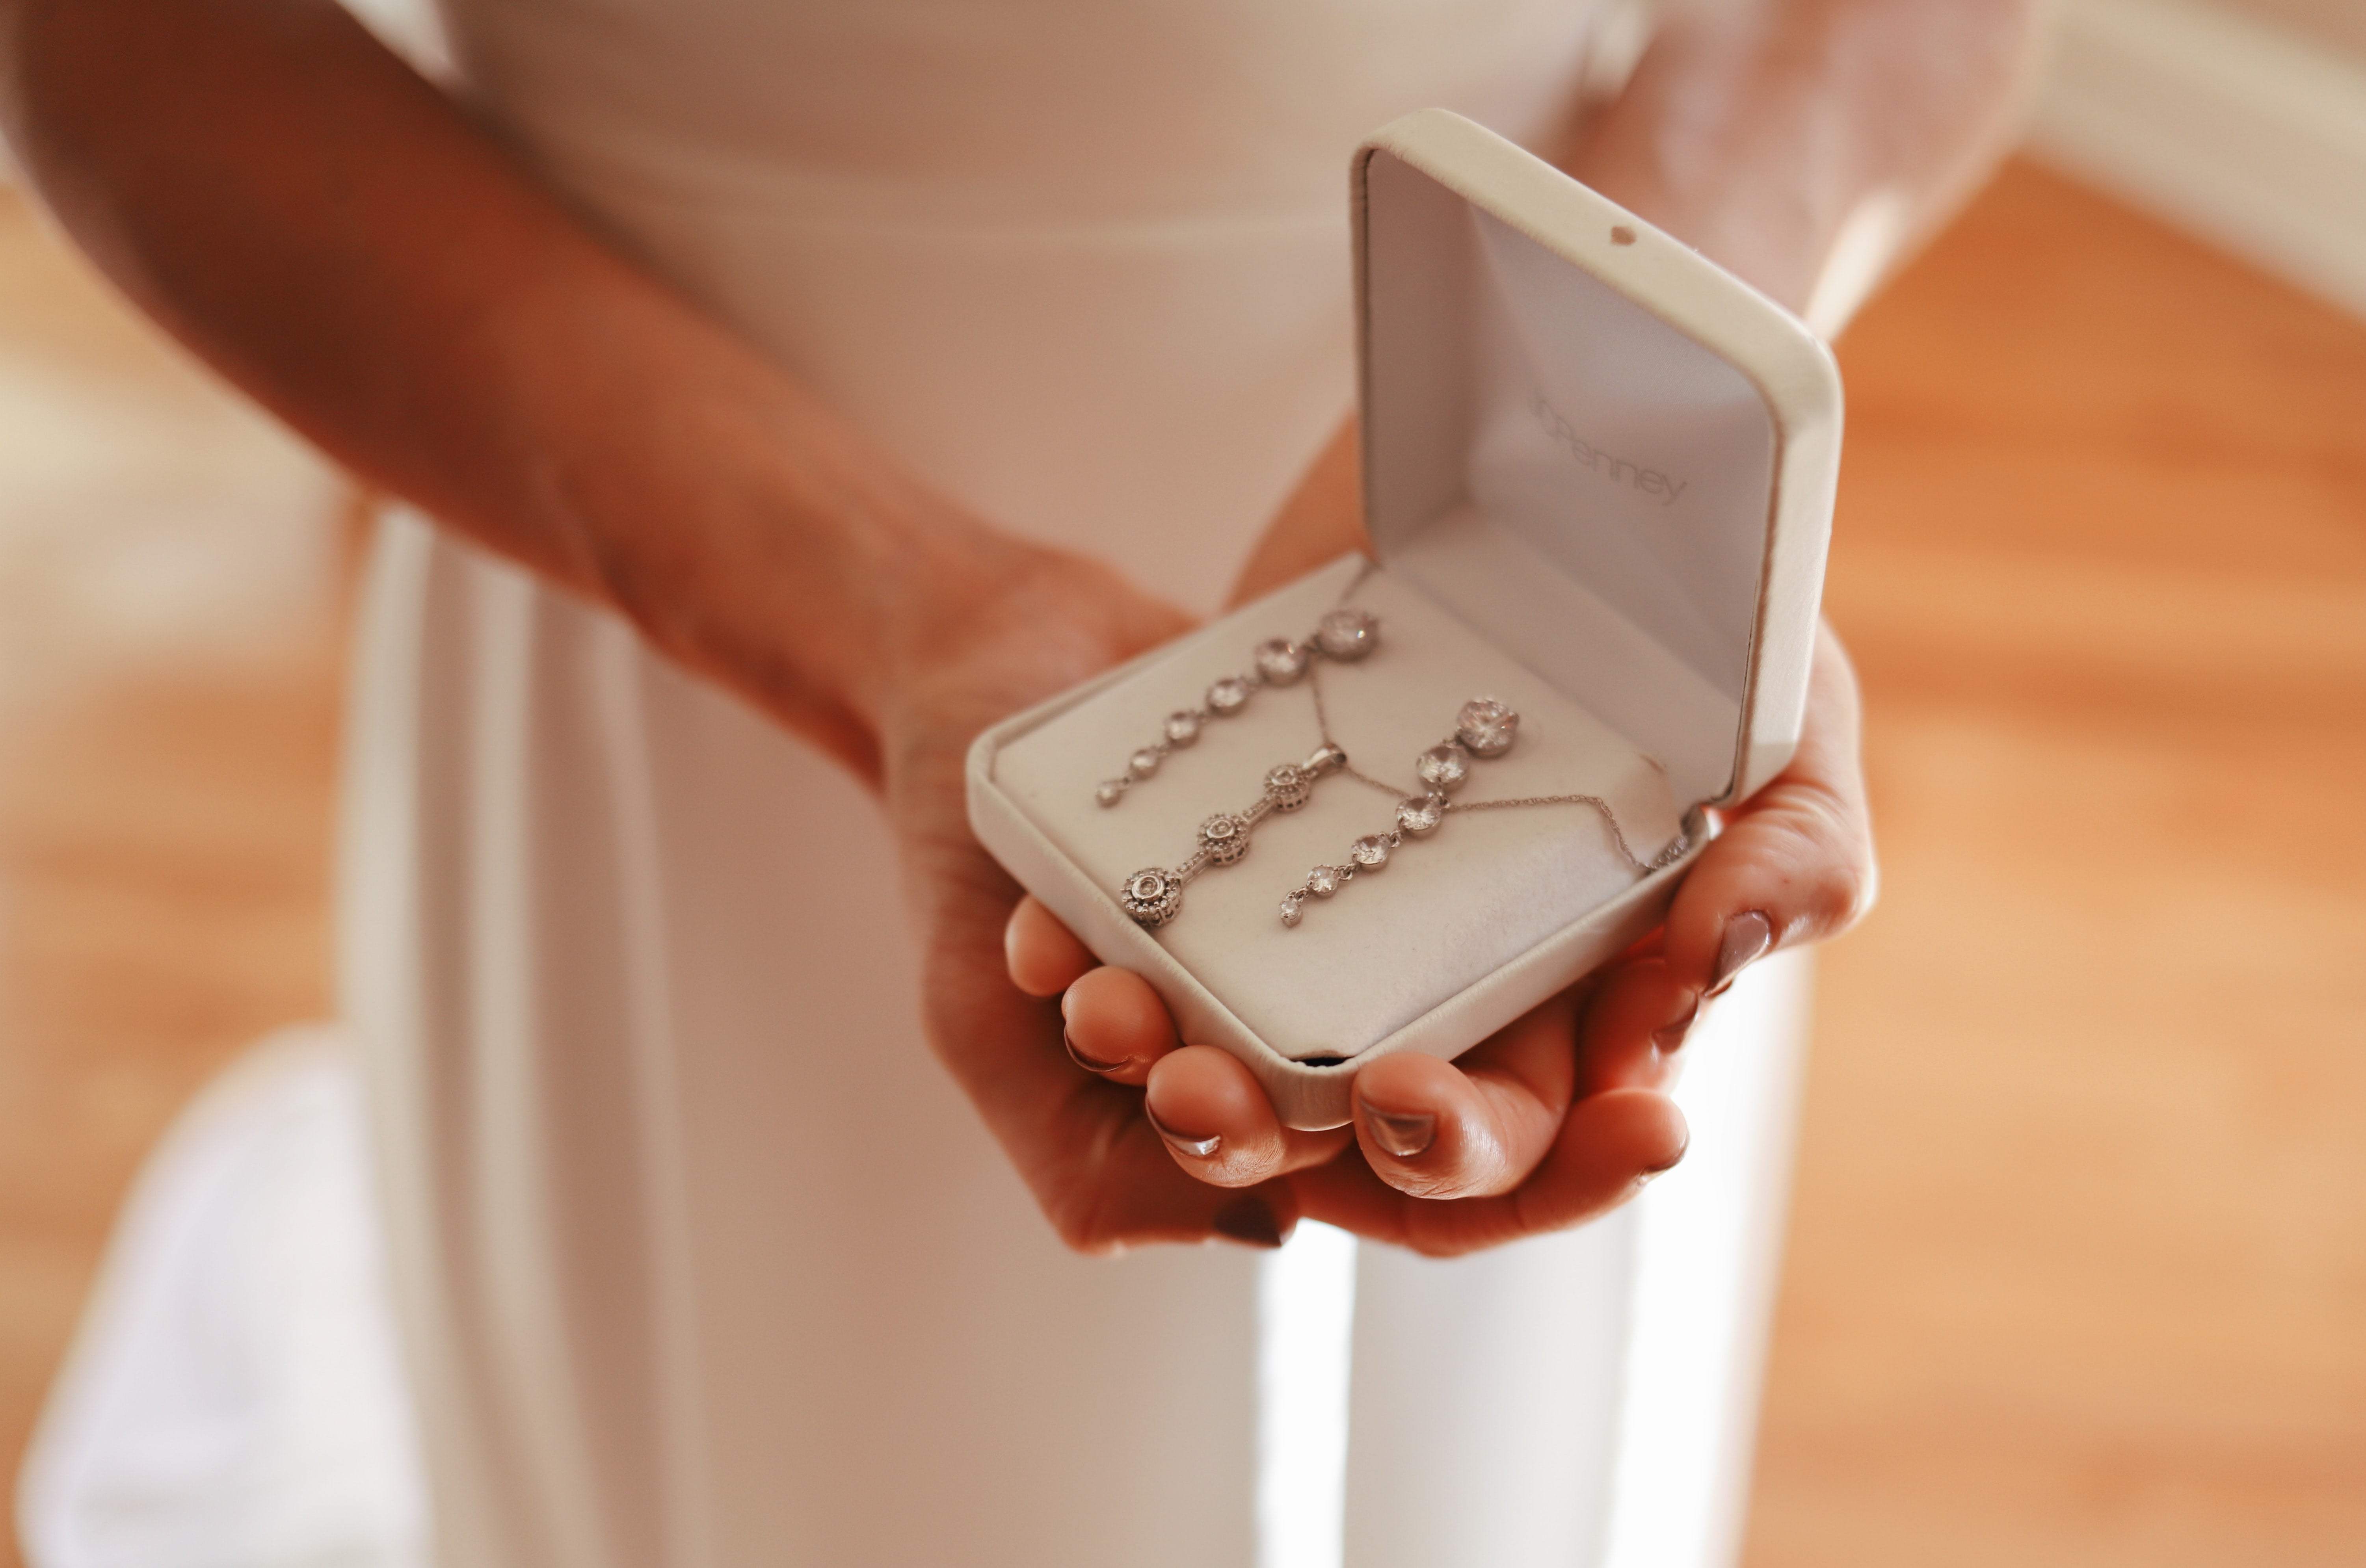 woman in white holding a jewelry box with swarovski pendant necklace and swarovski drop earrings